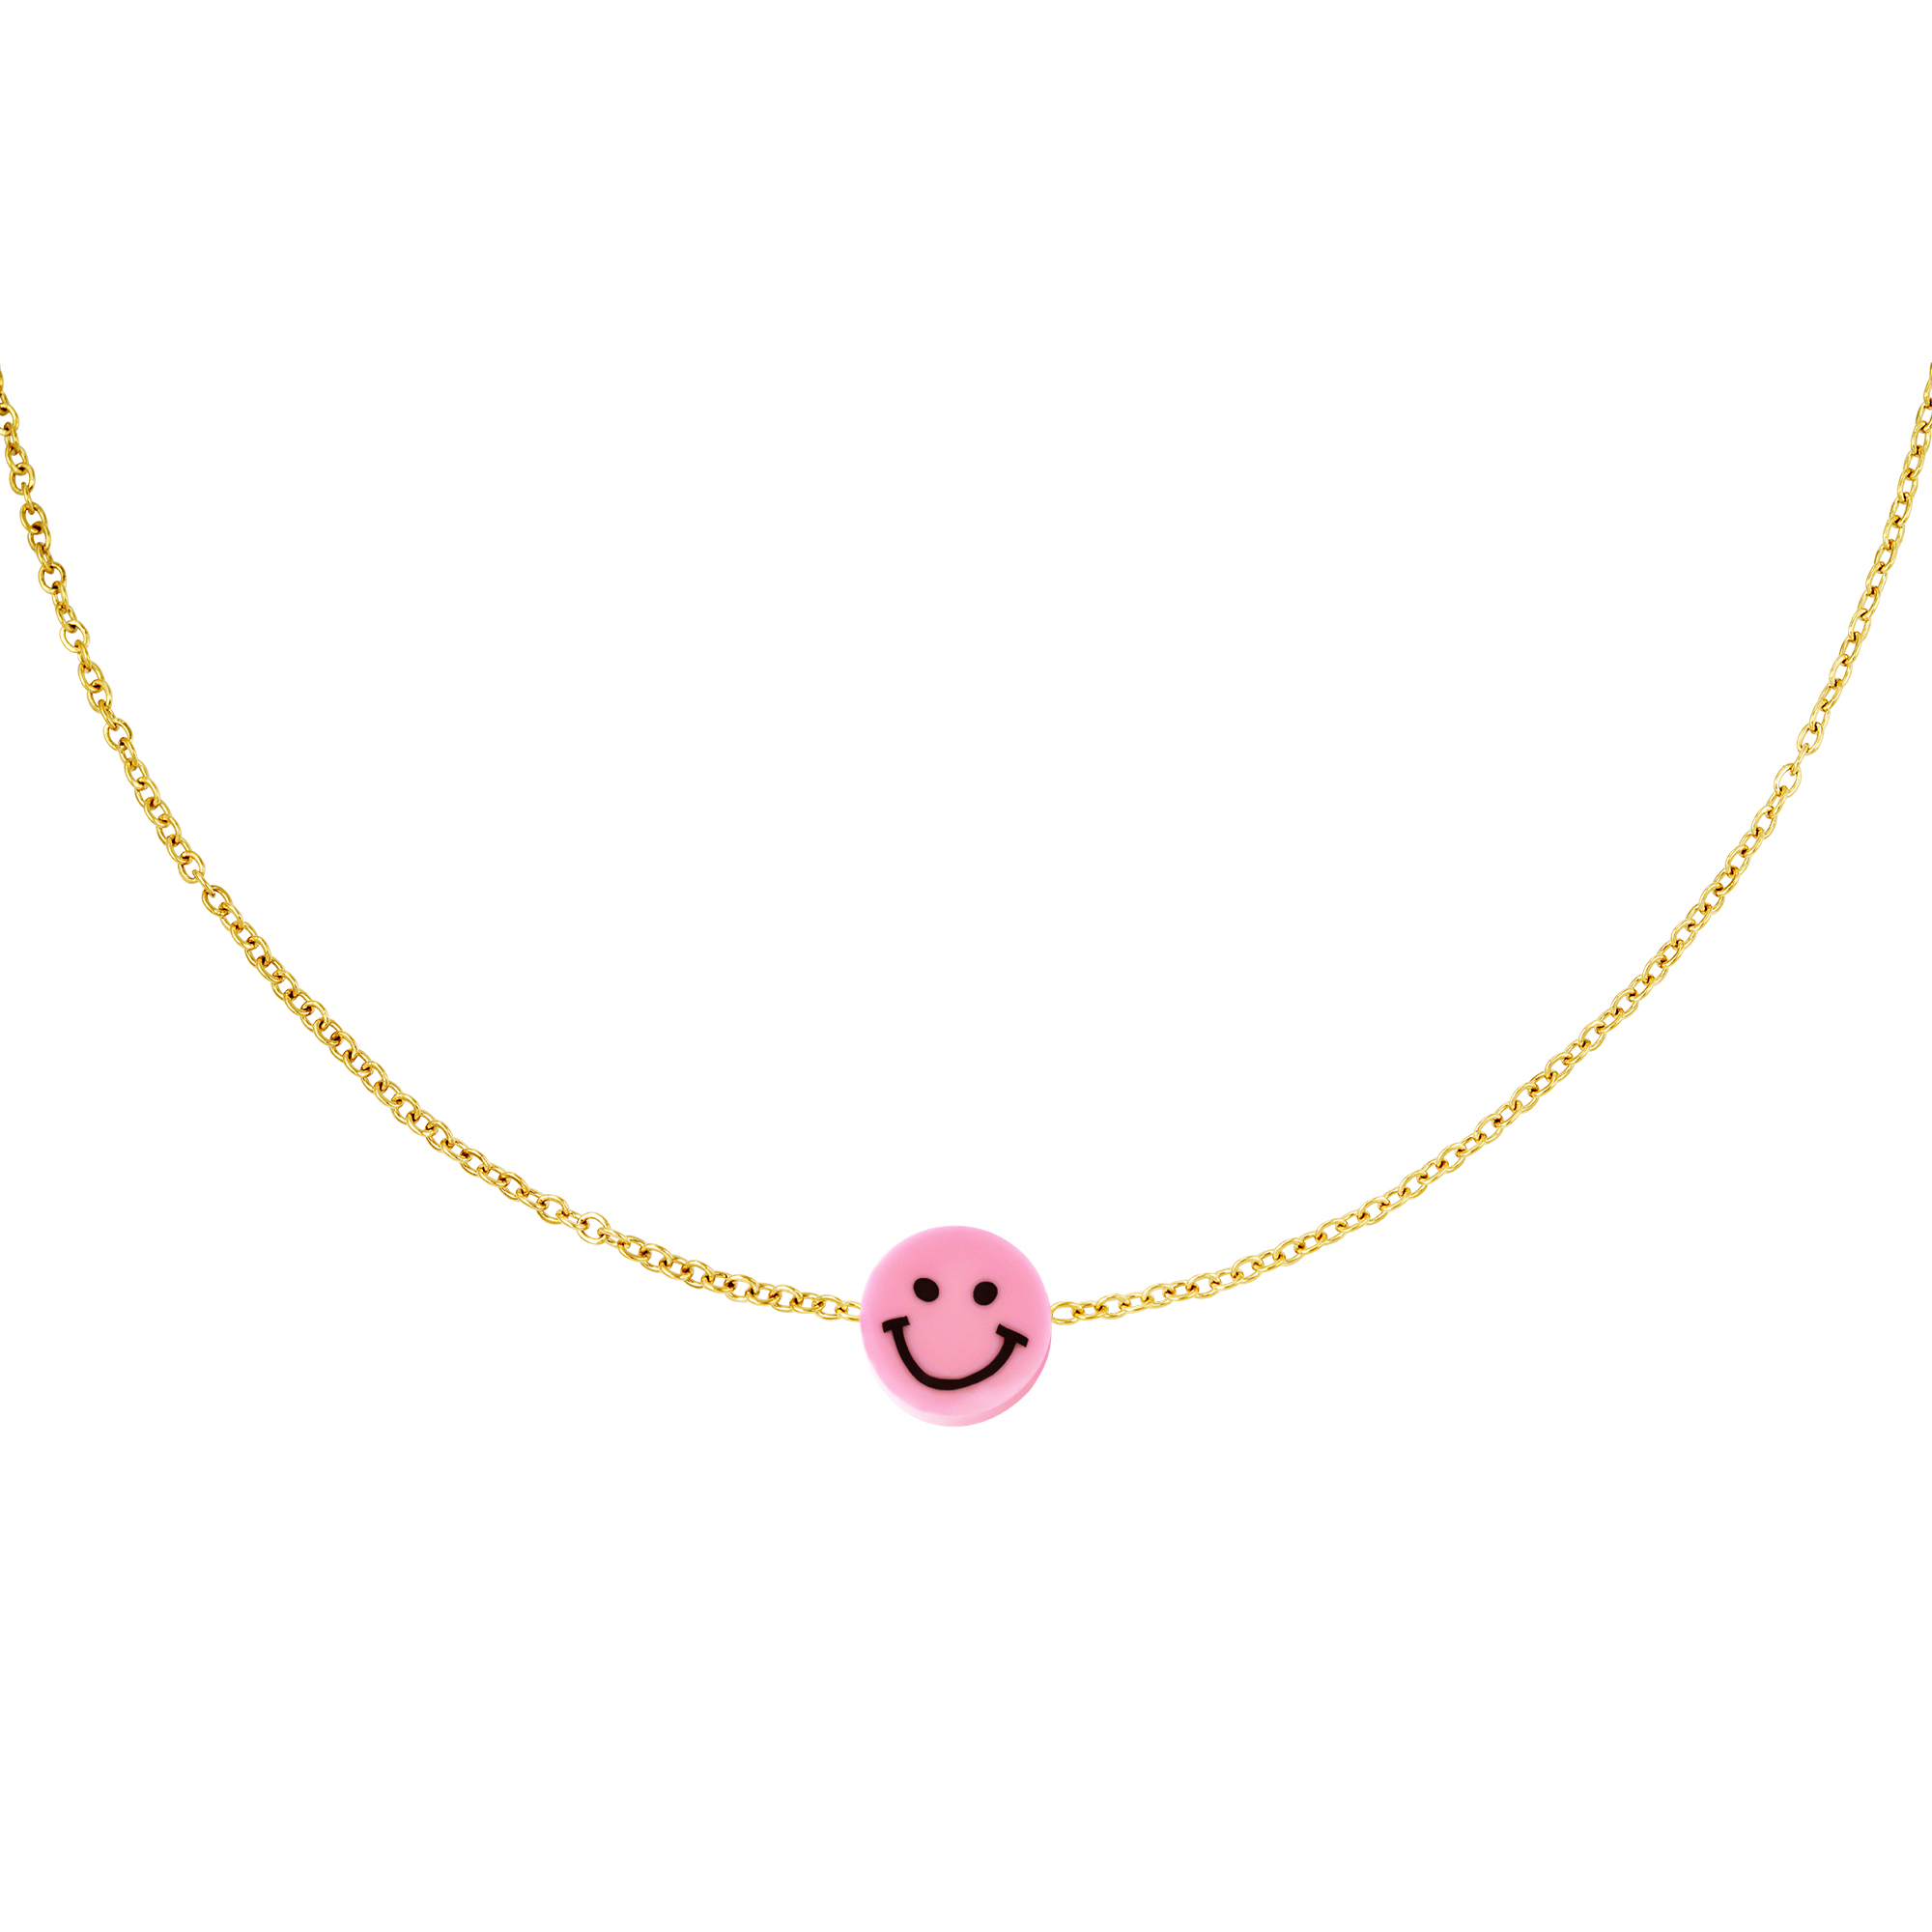 Stainless steel necklace smiley